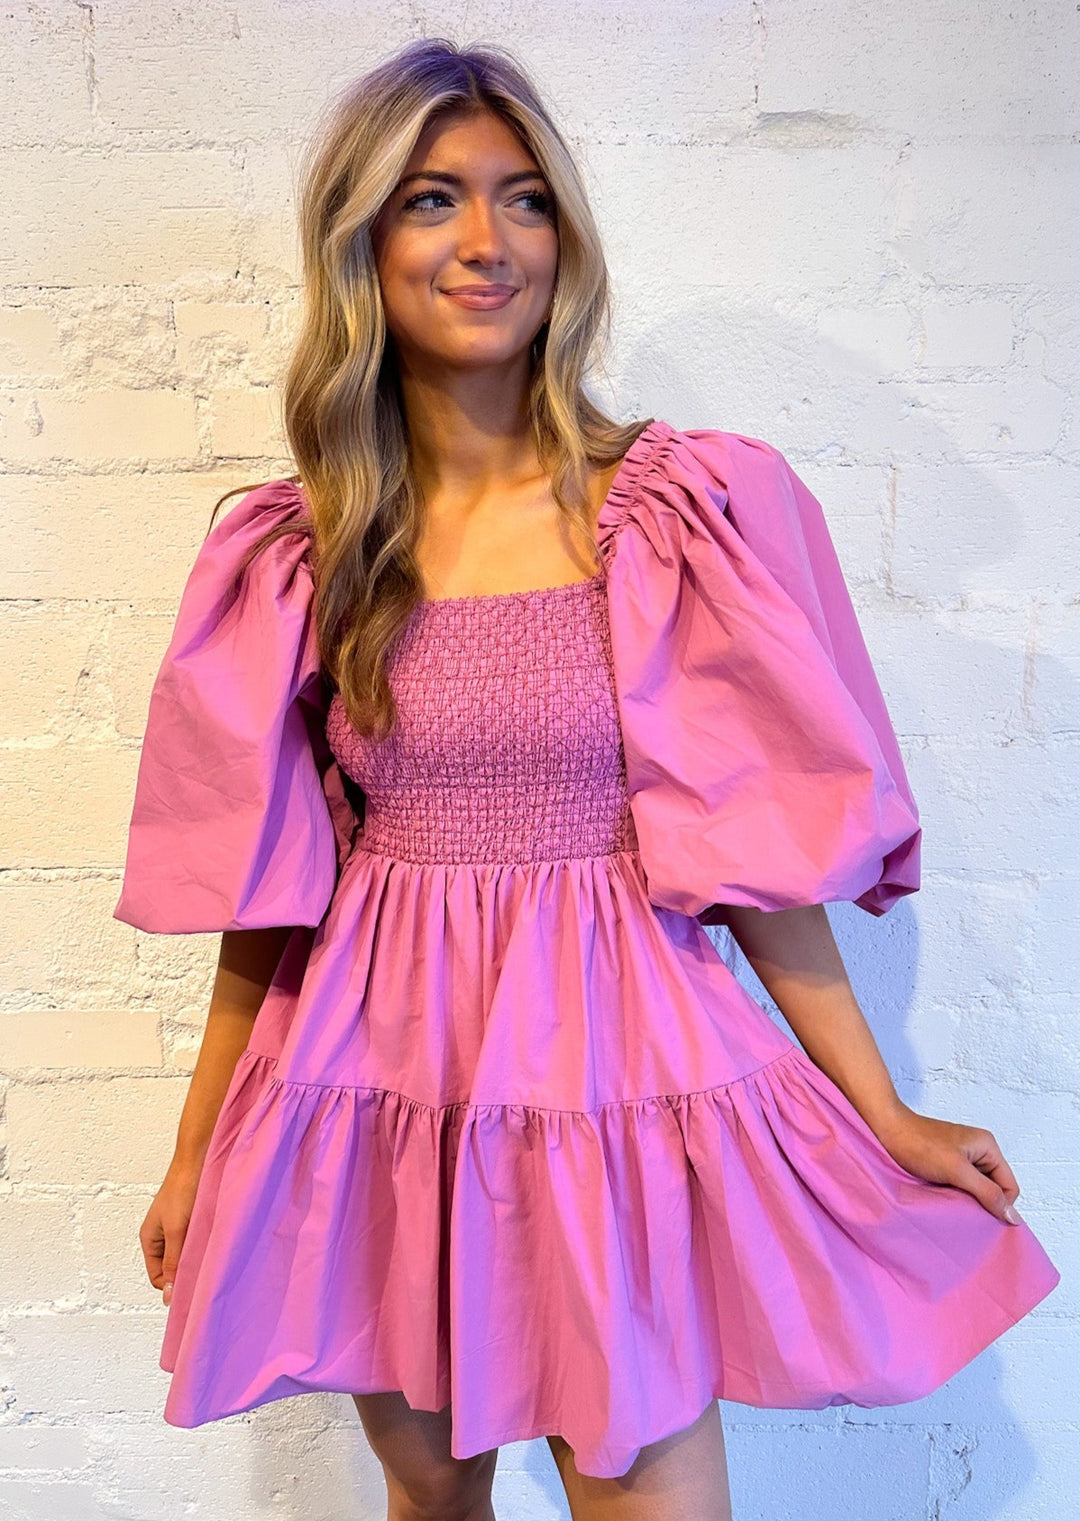 Frequency Pink Dress, Dresses, Sofie the label, Adeline, dallas boutique, dallas texas, texas boutique, women's boutique dallas, adeline boutique, dallas boutique, trendy boutique, affordable boutique